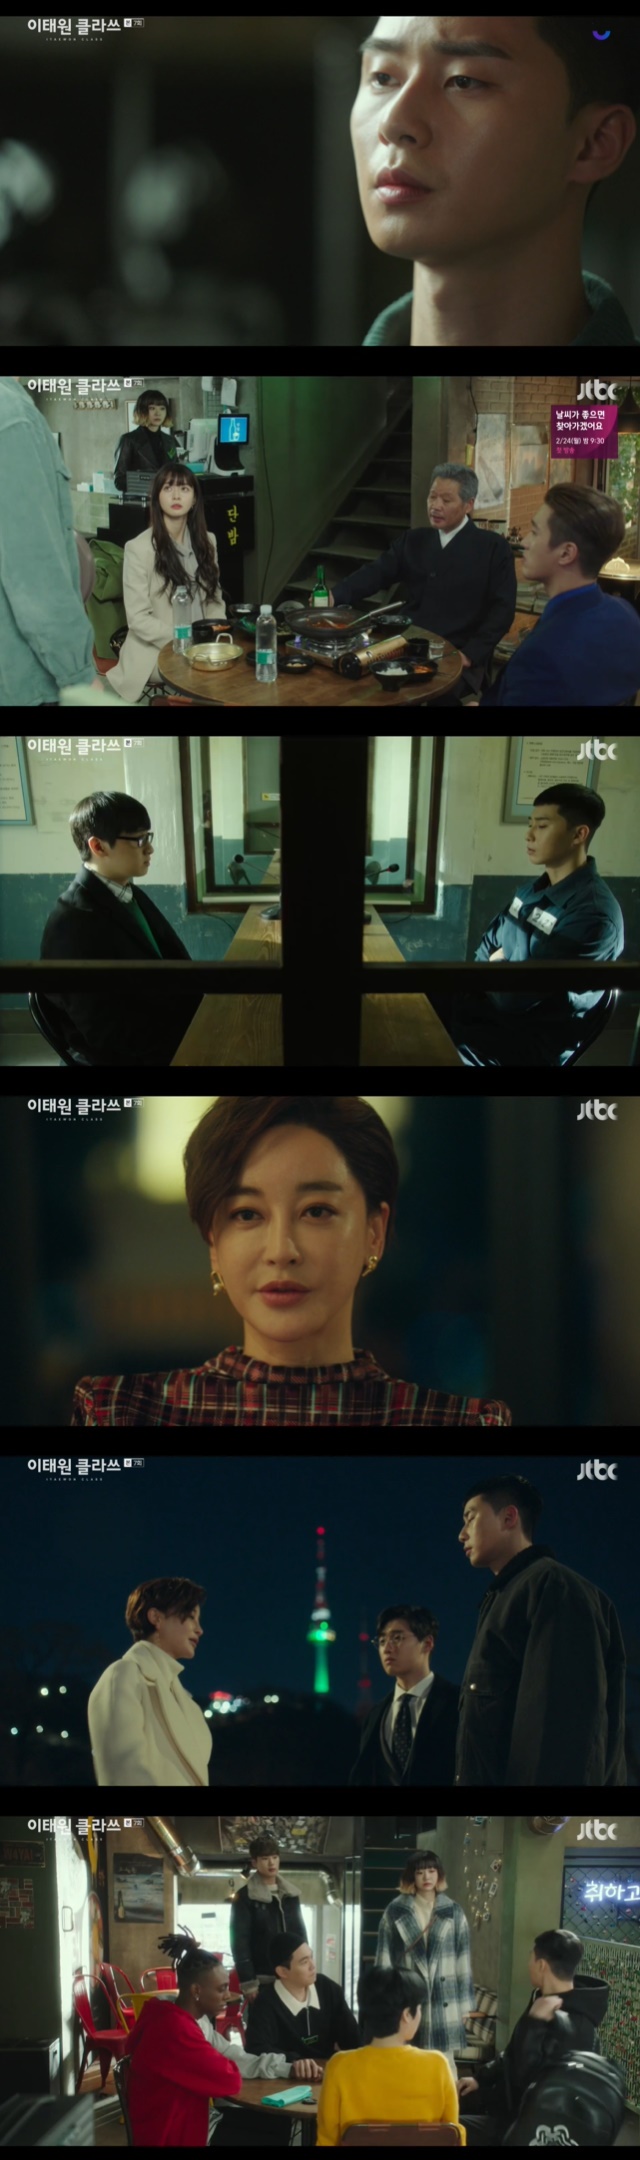 Park Seo-joon faces crisis in Yoo Jae-myungs GutIn the 7th episode of JTBCs Golden Earth Drama Itaewon Klath (playplayed by Cho Kwang-jin/directed by Kim Sung-yoon), which was broadcast on February 21, Park Seo-joon started fighting with Jang Dae-hee (Yoo Jae-myung) in earnest, starting with 1.9 billion investments in Jangga.When Park found out that he had a bigger goal than he thought, he visited the night with Oh (Kwon Na-ra) and The Fountainhead (Ahn Bo-hyun).The brand image may have been lost, but the value and essence of the market has not changed, Park told Jang Dae-hee, who asked why he bought the stock eight years ago and recently.I thought it would be money if I looked at it in the long run. Jang Dae-hee, who tasted sweet-night food as a guest, said it was too much to confront Jangga and told him to give up and live moderately.I may be slower, but Im taking steps and at the end of it you are.What you can do for Father is get down on your knees and get paid and Ill make it. But Jang Dae-hee said, The tiger doesnt bark.I just bite it, he warned me to tell the meaning of the word directly.Park was being helped by Lee Ho-jin (Die Wit) who had become the starting point of his bad performance with The Fountainhead (Ahn Bo-hyun).Lee Ho-jin, who had spent three years in the harassment of The Fountainhead, said that Parks goal was to go to the prison where he was imprisoned and get back at the Fountainhead.Park and Lee Ho-jin were on the same side, and Lee Ho-jin, who became a competent fund manager, was playing a role as a helper in managing and managing the stock and himself of Park.Park met Kang Min-jung (played by Kim Hye-eun) through Lee Ho-jin.While Roy suggested that he be empowered to push the Fountainhead and take over the long price to Kang Min-jung, who was moving according to the truth, Kang Min-jung was skeptical of the unverified Park.Kang Min-jung said, This is a different version. Your entire store of hundreds of millions of dollars is a small stock market.There is nothing you can do with me. He threw a mission to make Jang Dae-hee come to Roys store to eat rice to verify his ability.After Jang Dae-hee went to the night, Kang Min-jung took the hand of Roy as promised.Jang Dae-hee, who learned this fact, called Kang Min-jung and put a silent pressure on him by referring to his long-standing relationship.Joe-yool Lee expressed his sadness to Roy, who is planning something that he can not tell alone without telling anyone.Joe-yool Lee said, I cant stand it because I need it. I want to be strong with you.If its a personal thing, give it a little bit of a burden, Park said, and after a while, Park went to the house of the police officer Oh Byung-hun (Yoon Kyung-ho), who had covered up his fathers accident in the past, with Joe-yol Lee.Oh was suffering from a great feeling of guilt about his daughter who welcomed Roy.Oh fell to his knees and apologized for somehow compensating, but he said, What you can do for me is reveal the truth and turn yourself in.At least I should be a dignified father who can support my daughters dream. In the coming to Oh Byung-huns house, Joe-yol Lee, who had heard of Parks relationship with The Fountainhead, his fathers death, and his plans for revenge, noticed that he had a plan to make the Fountainhead pay for it as Ohs embroidery.Joe-yool Lee, who leaned his head against Roys knee, found a wound that had been caused by hard work from the time he was aboard a fishing boat throughout Roys body to the hard work.Joe-yool Lee was saddened by the fact that he had been hard alone.Joe-yool Lee realized his love for Roy, with the idea that he would not let Roy hurt alone, and that he would kill everyone who touched him.Lee Ha-na